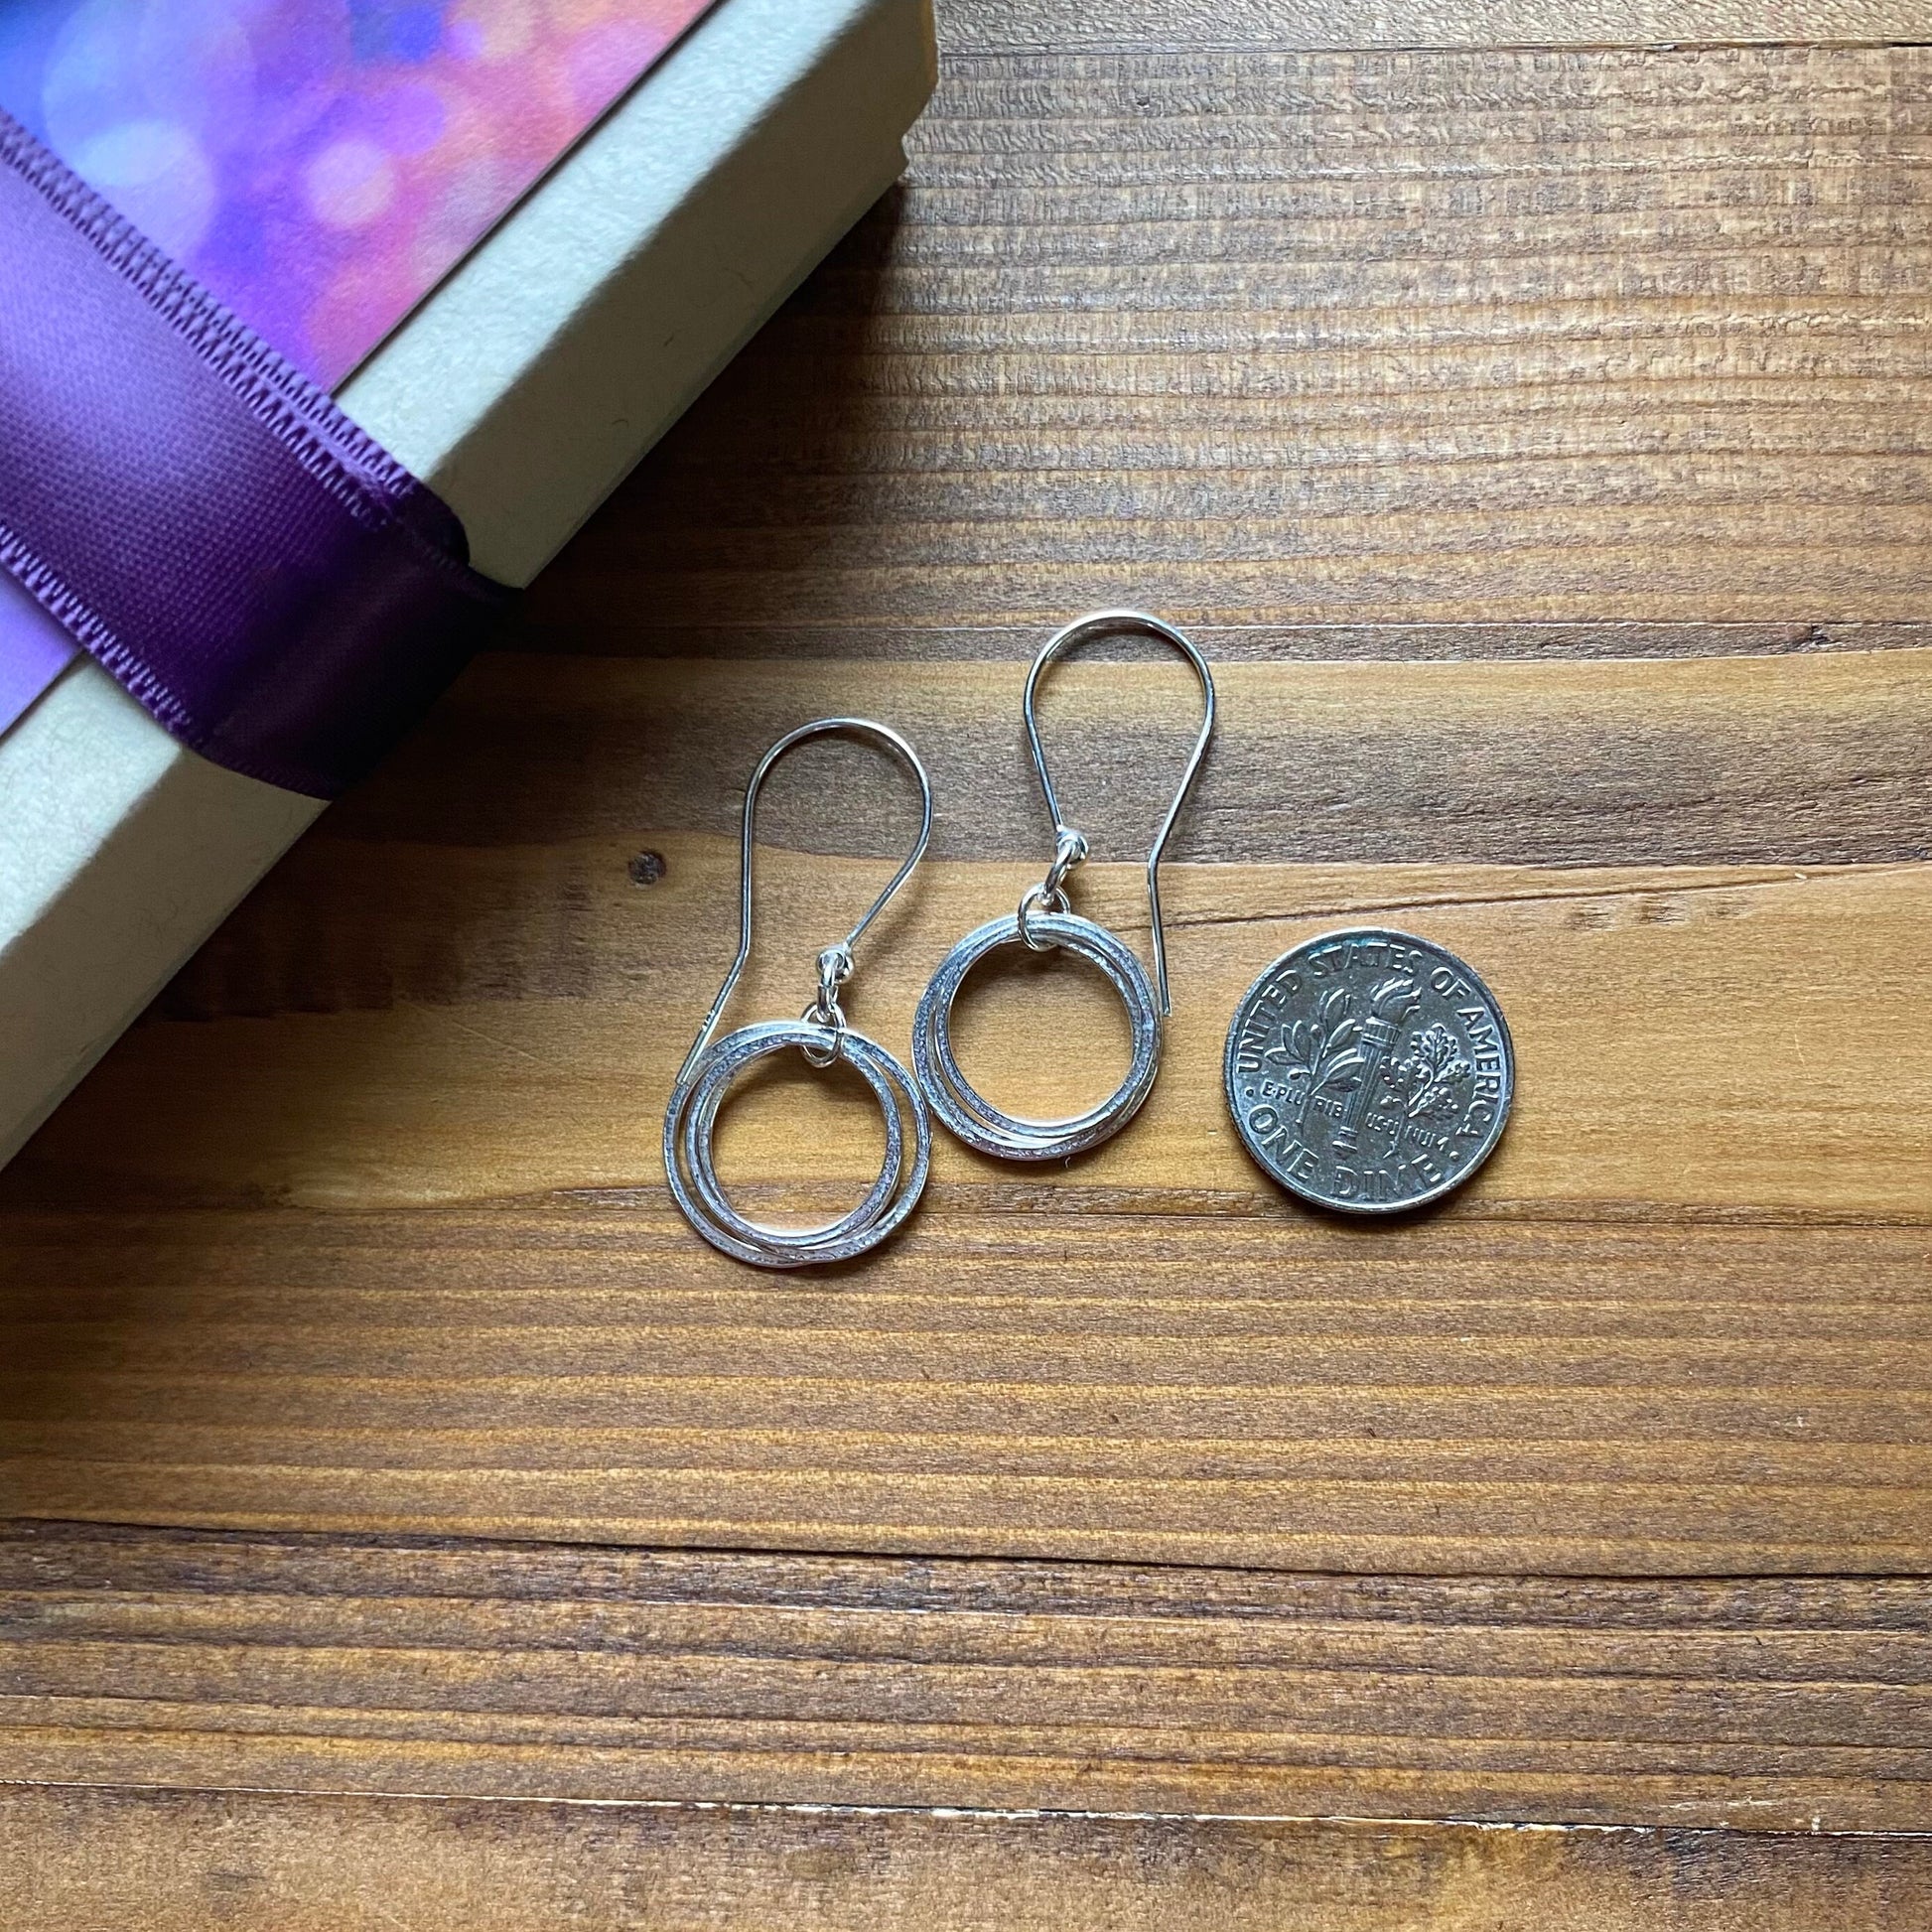 30th Birthday Earrings, Sterling Silver 3 Circles Small Hoops, Sparkly Textured Flat 3 Rings for 3 Decades, Elegant Birthday Gift for Her